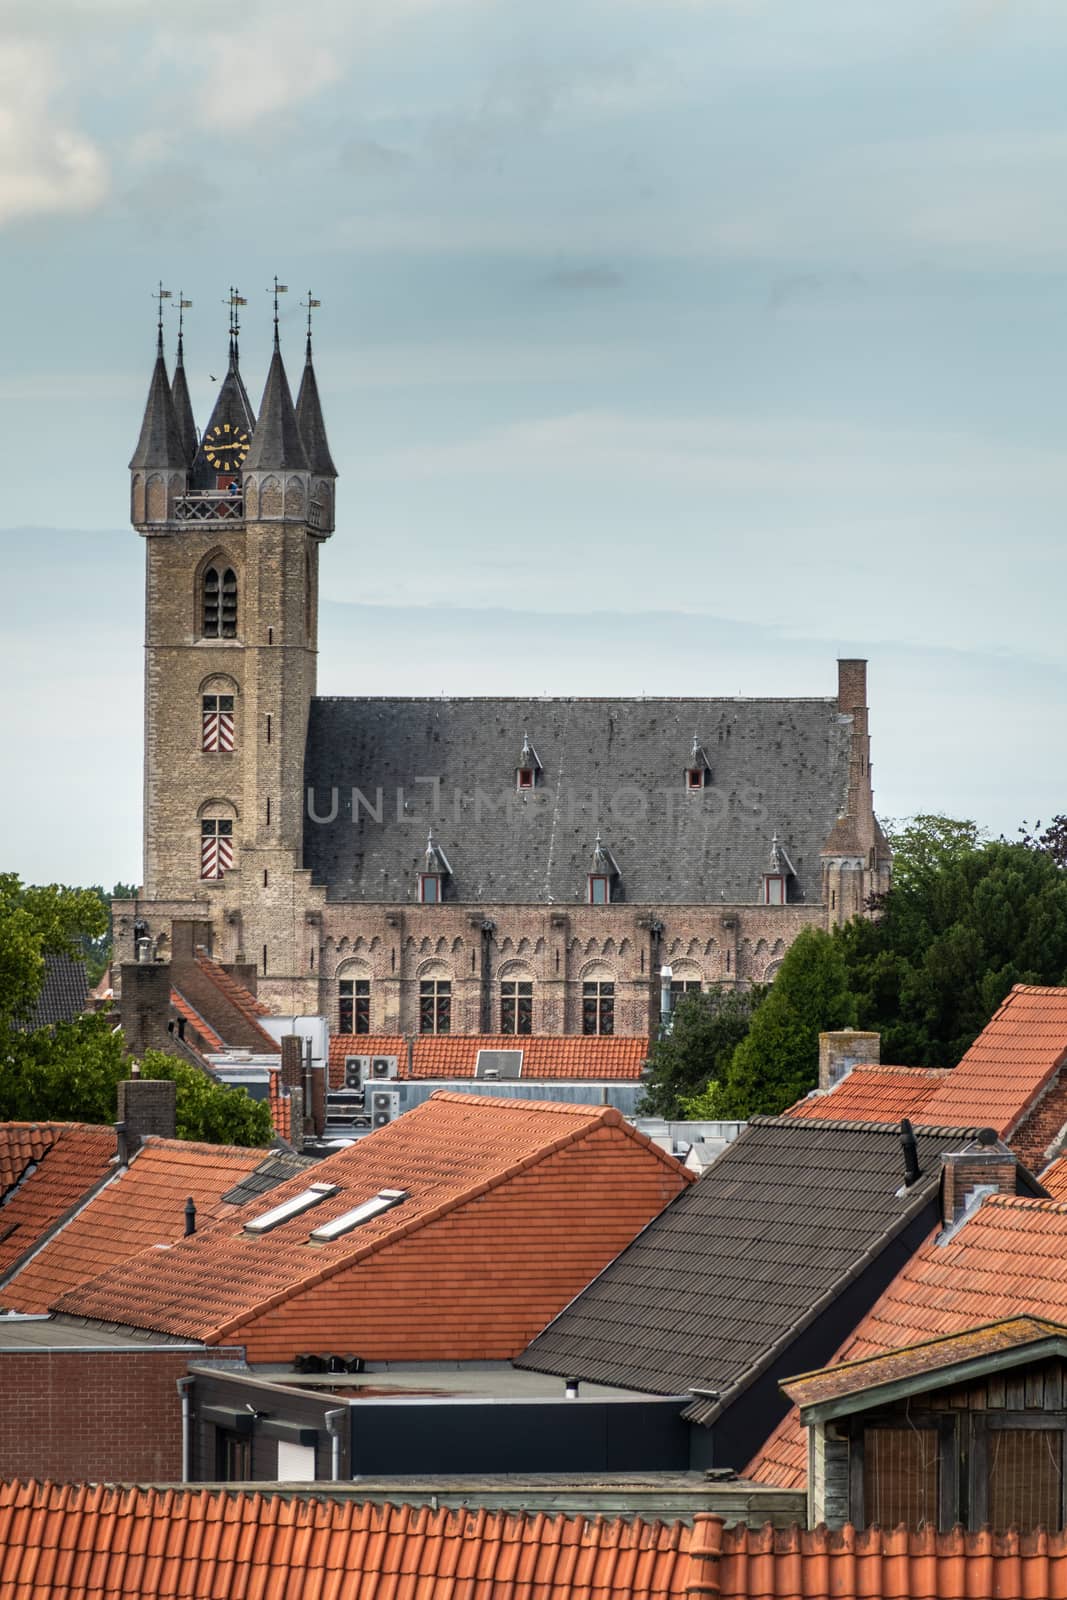 Sluis, the Netherlands -  June 16, 2019: View over red roofs at the brown brick Belfry with clock tower under light blue sky. Some Green foliage.